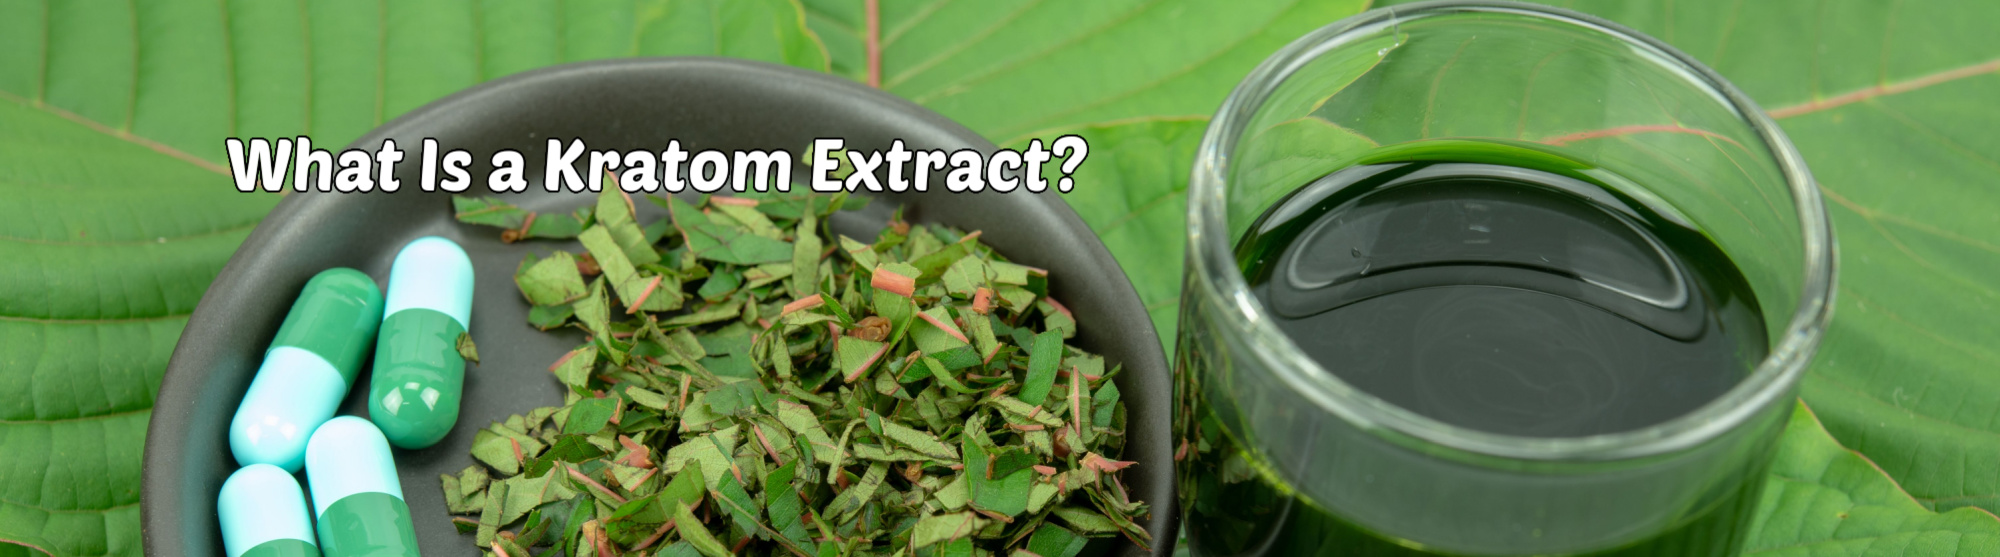 How to Make Kratom Extract